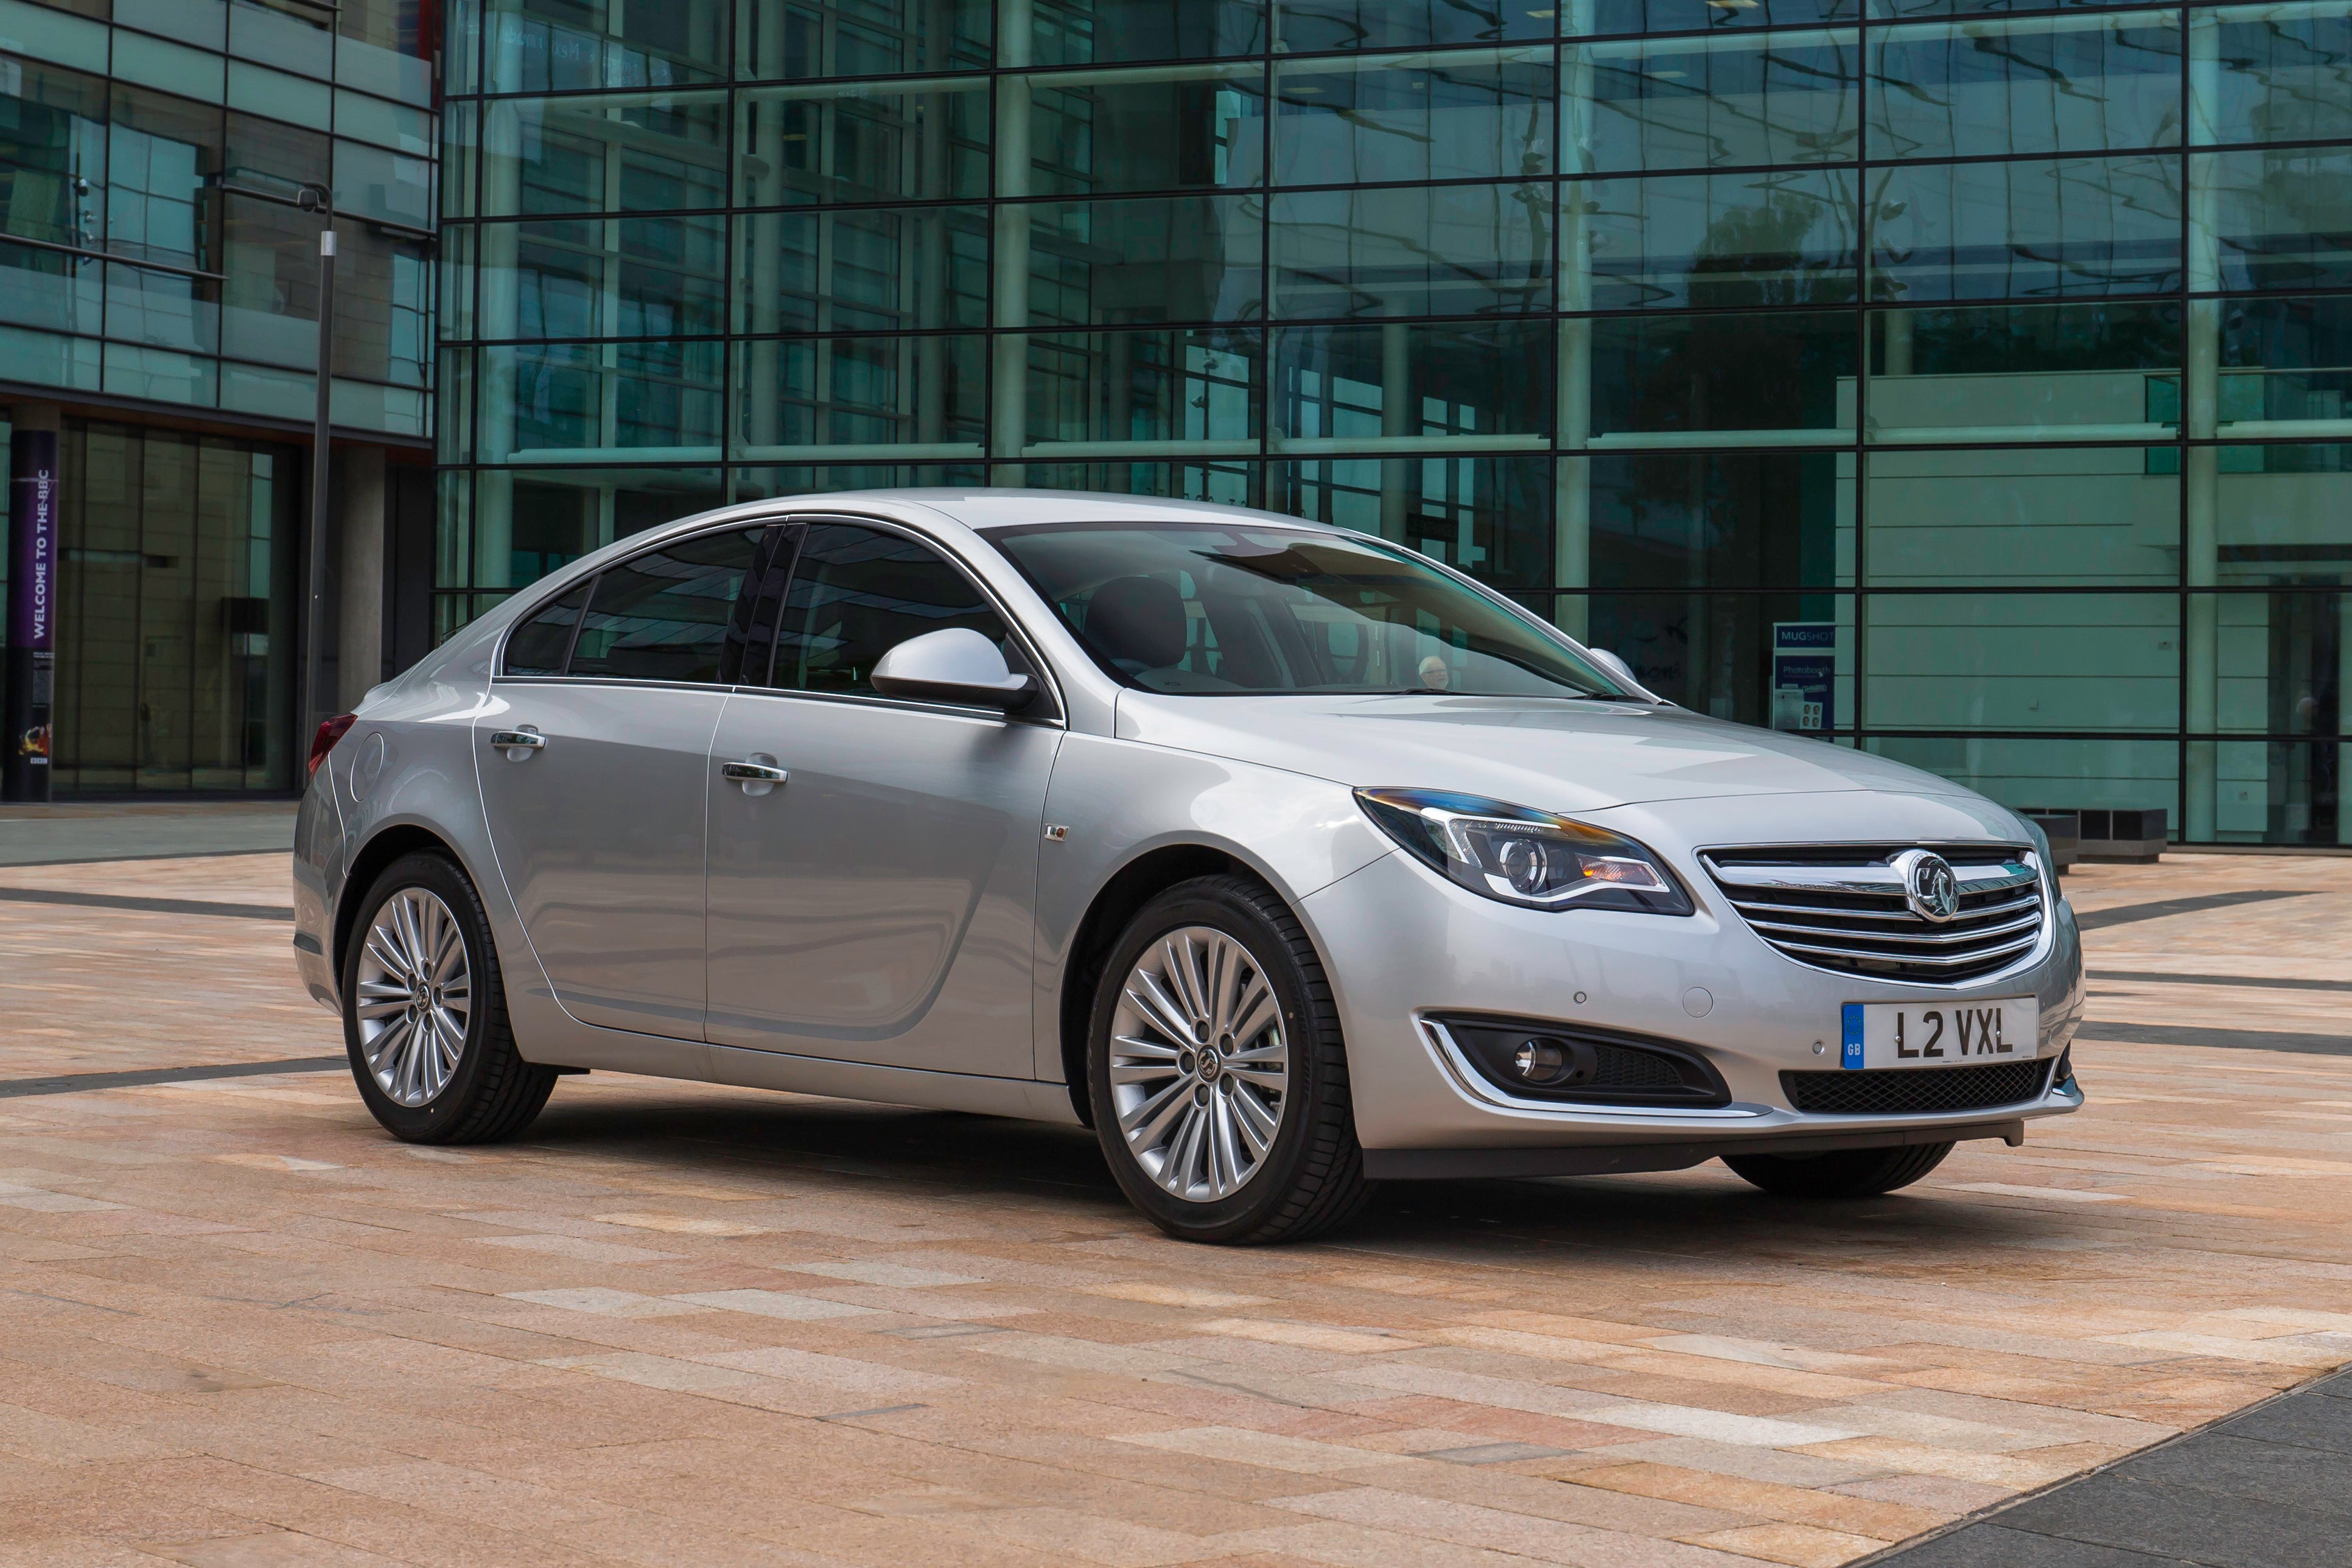 Vauxhall Insignia at Perrys